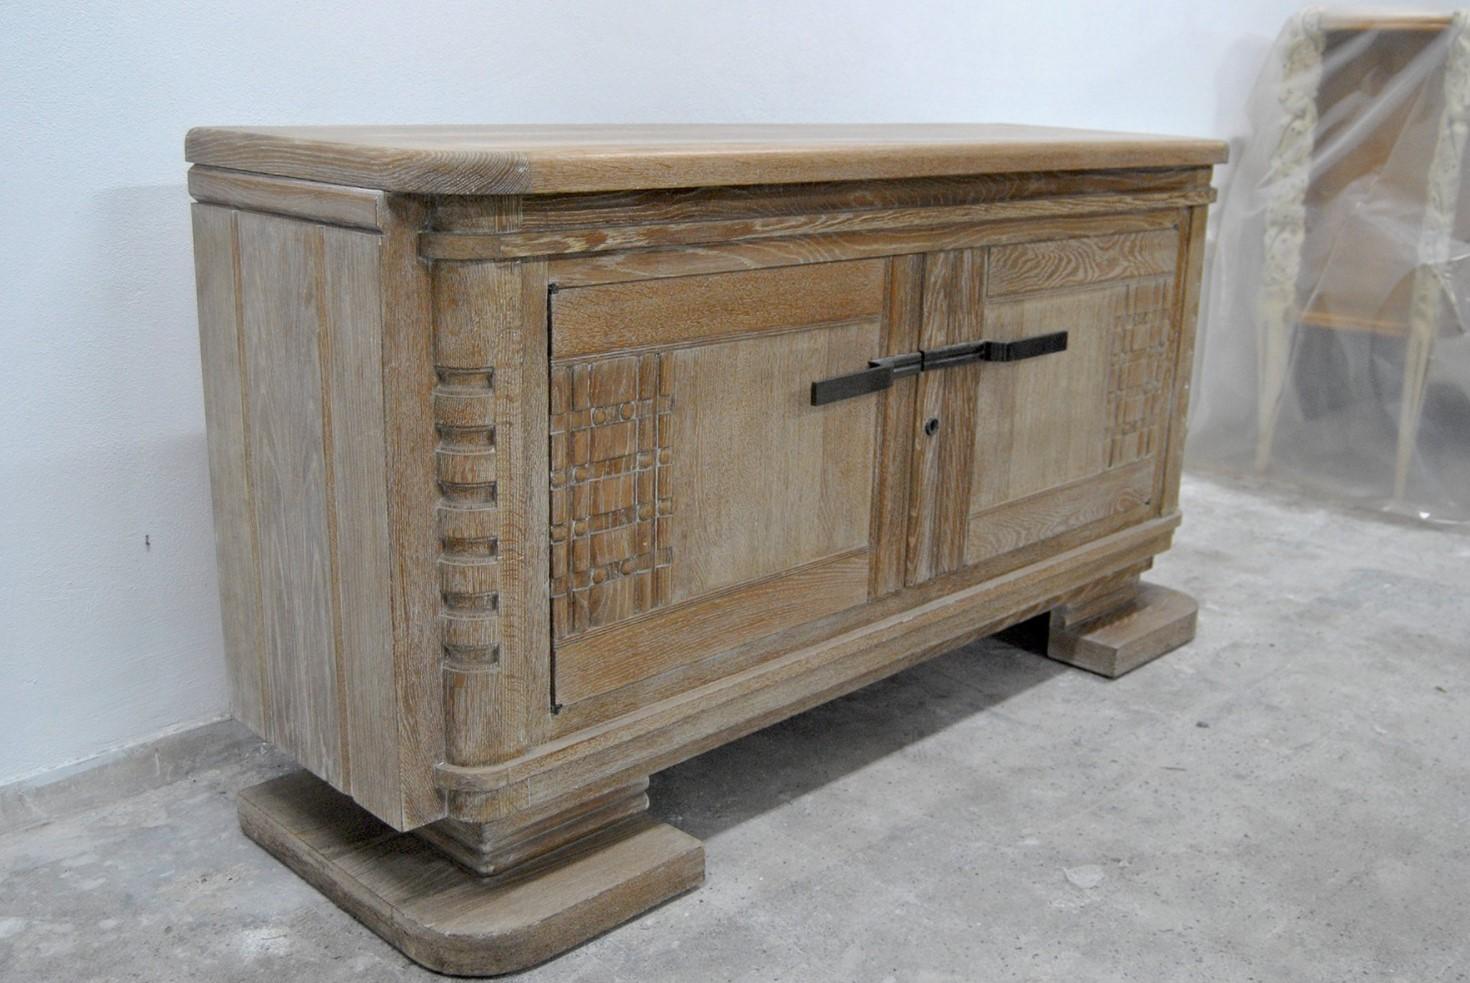 Beautifull vintage french sideboard, made of brushed oak wood.
Inside you will find two small drawers, wich make it very practical.

A vintage French piece of design, in excellent condition, that has been carefully restored to bring the original